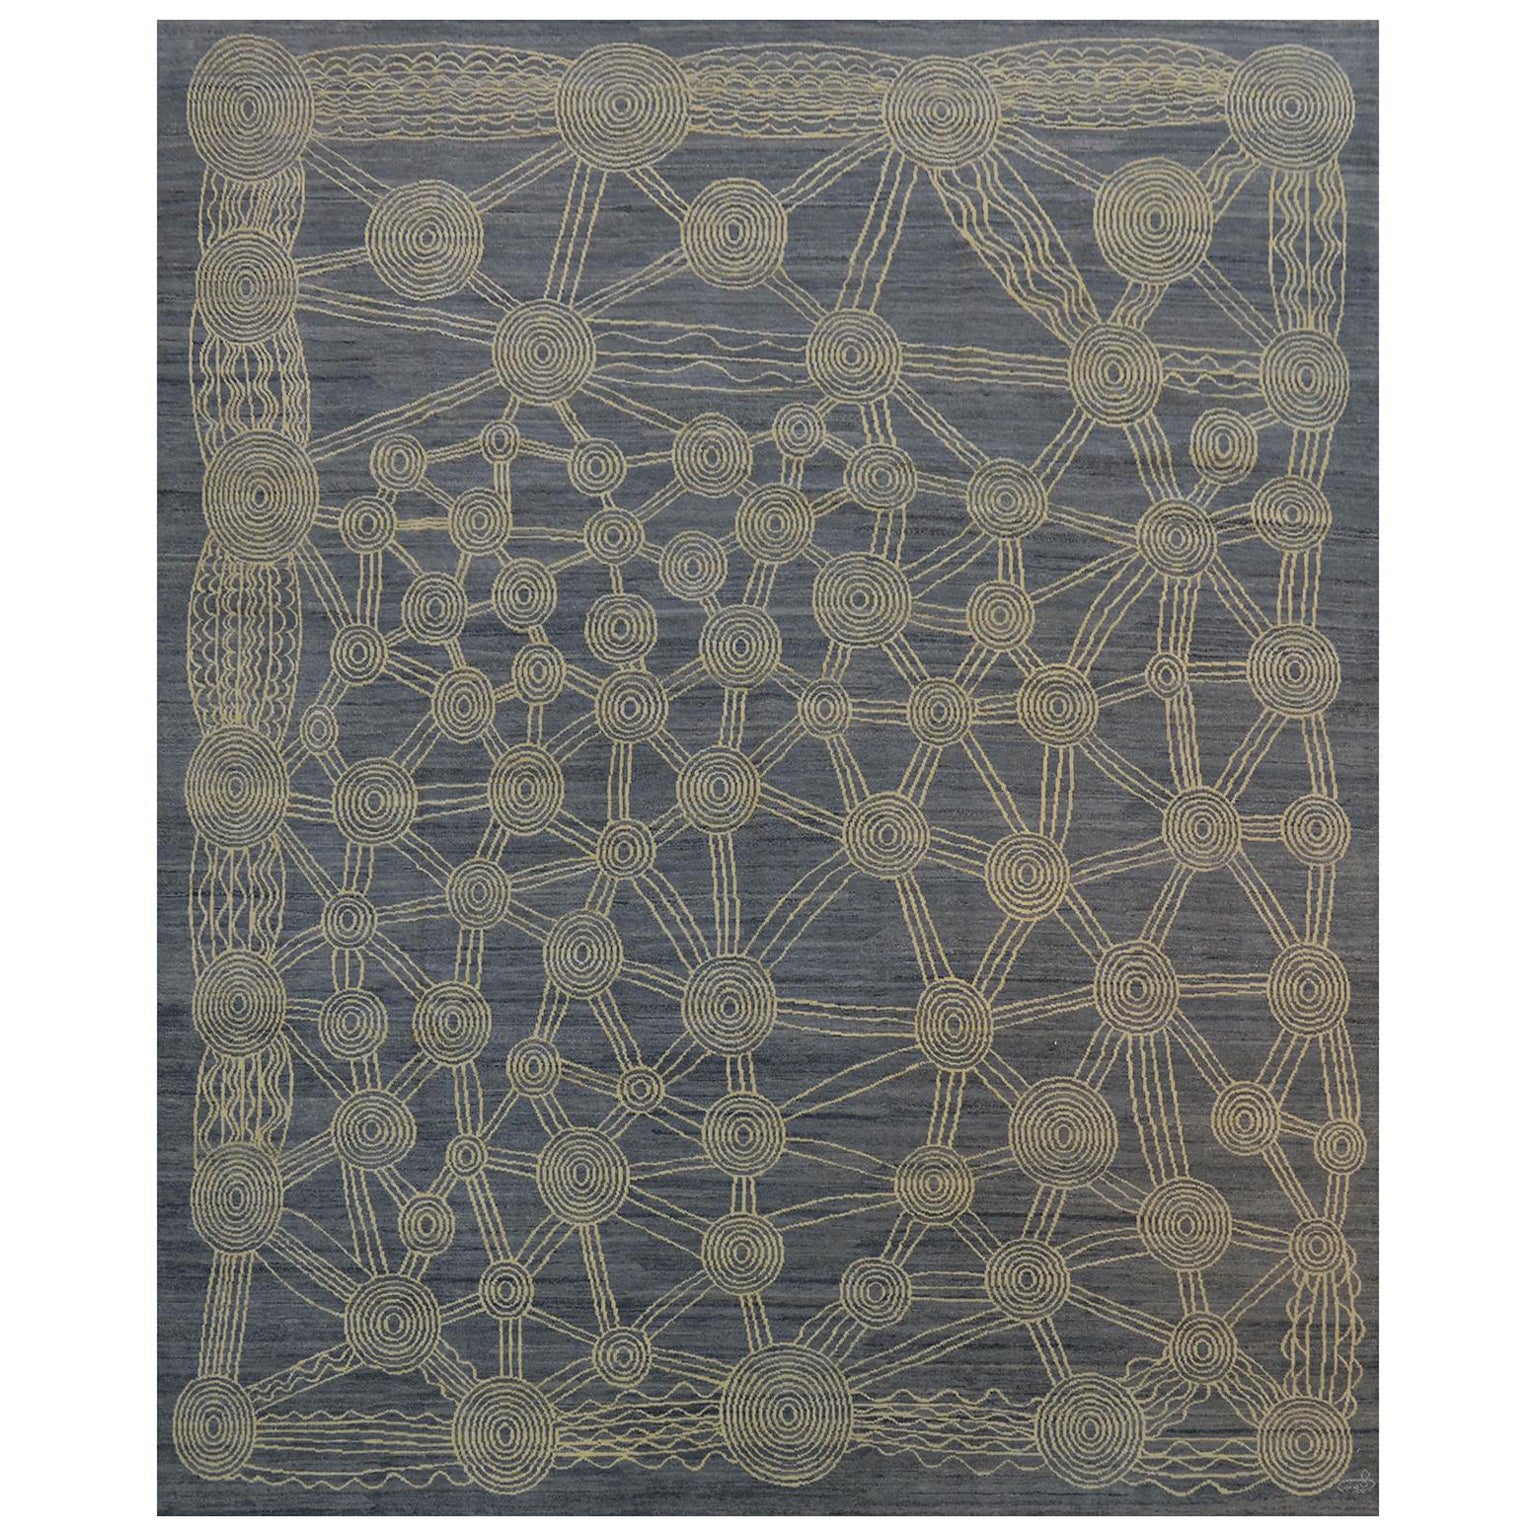 Orley Shabahang "Canberra" Contemporary Persian Rug in Gray and Cream, 8' x 10'